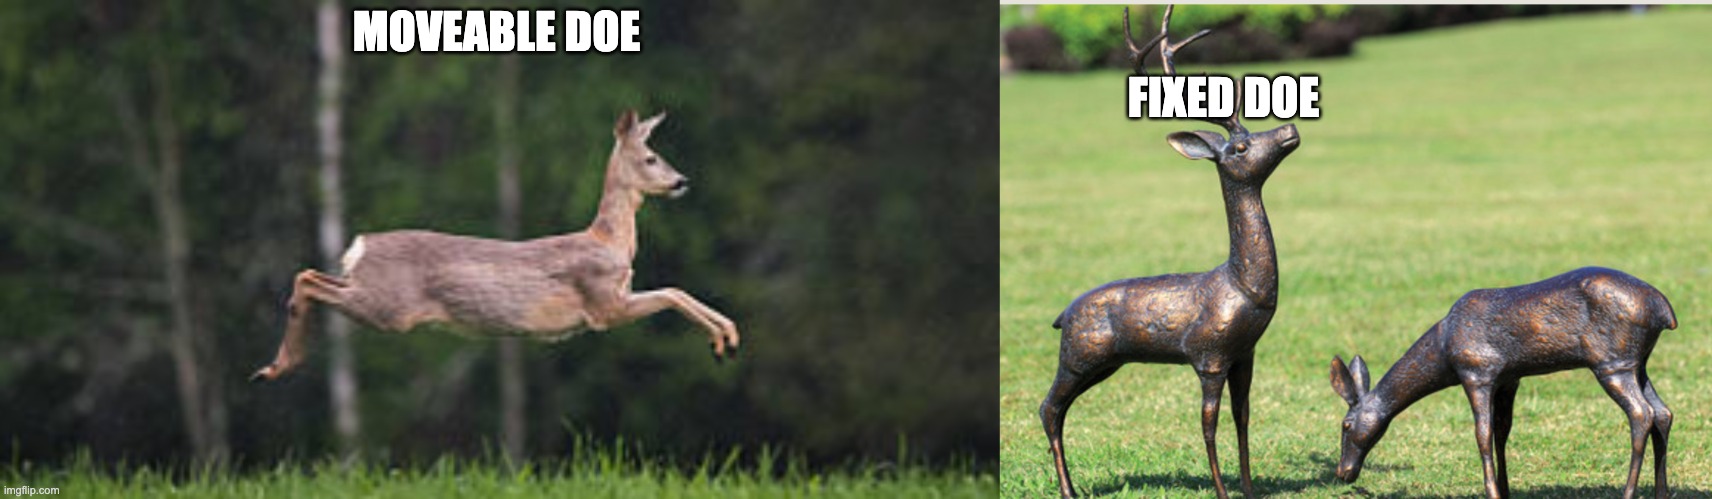 For Musicians Only |  FIXED DOE; MOVEABLE DOE | image tagged in music meme,music,animal music,music humor | made w/ Imgflip meme maker